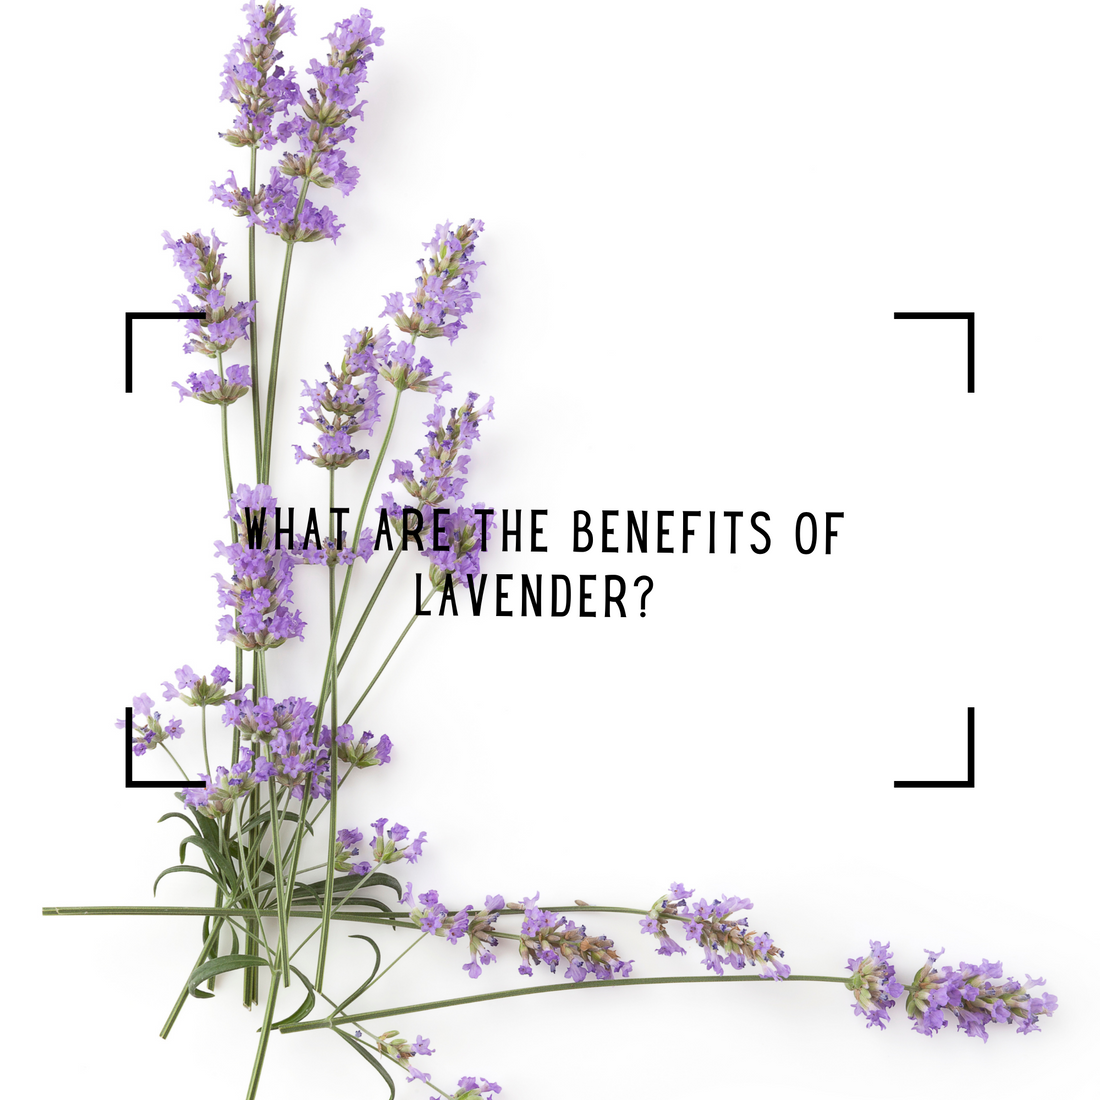 What are the benefits of lavender?